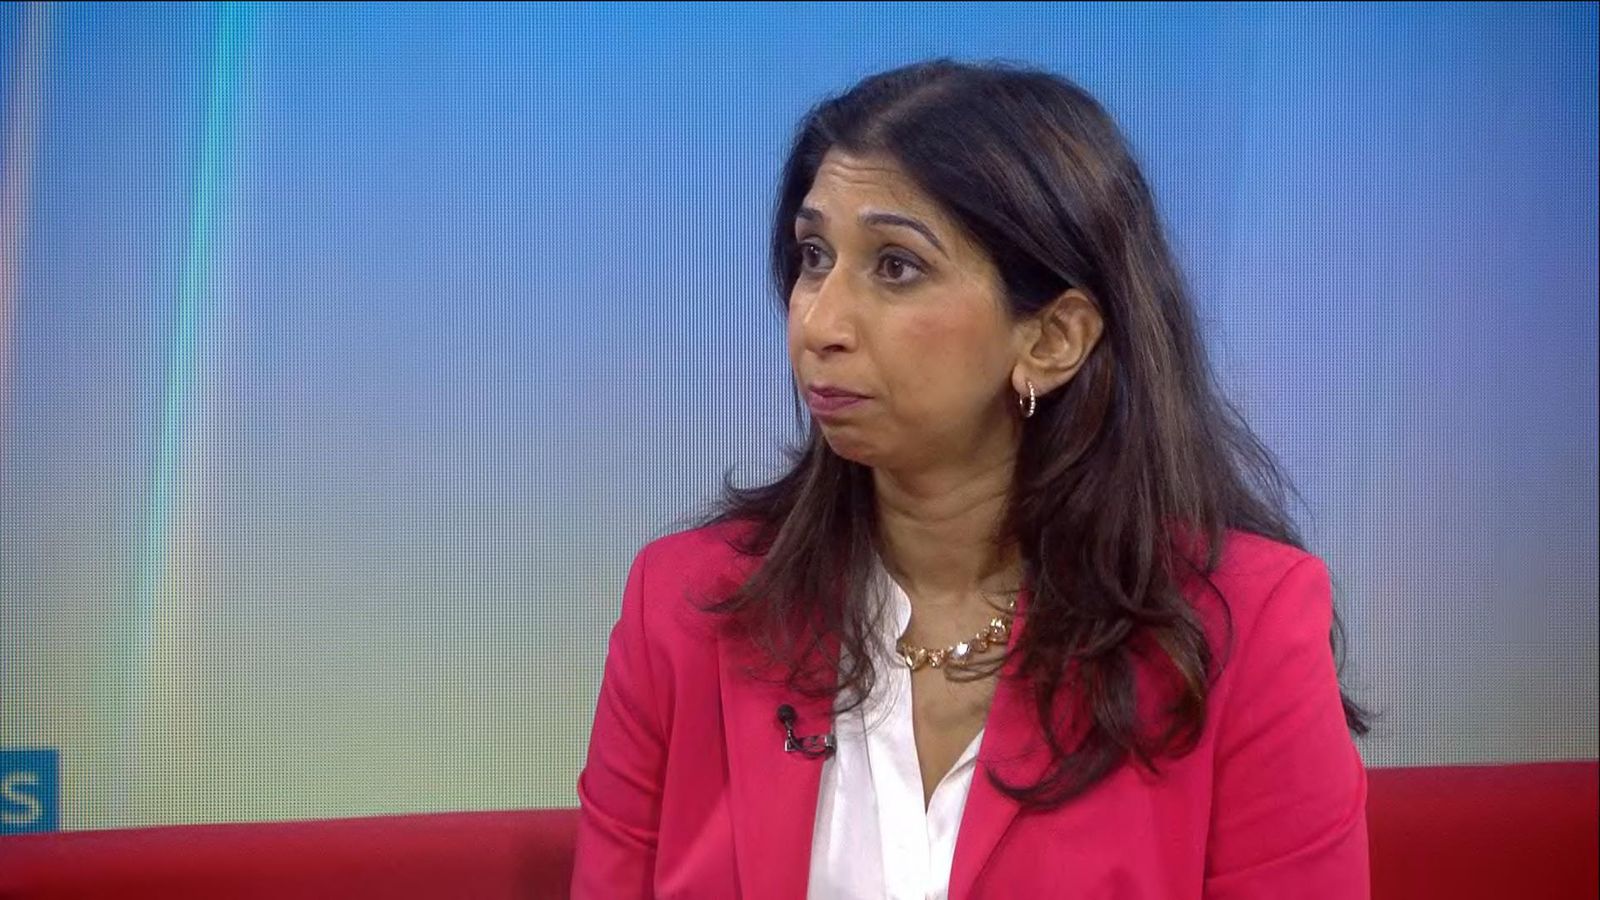 Home secretary Suella Braverman says 'We're not going to save the planet by bankrupting Britons'